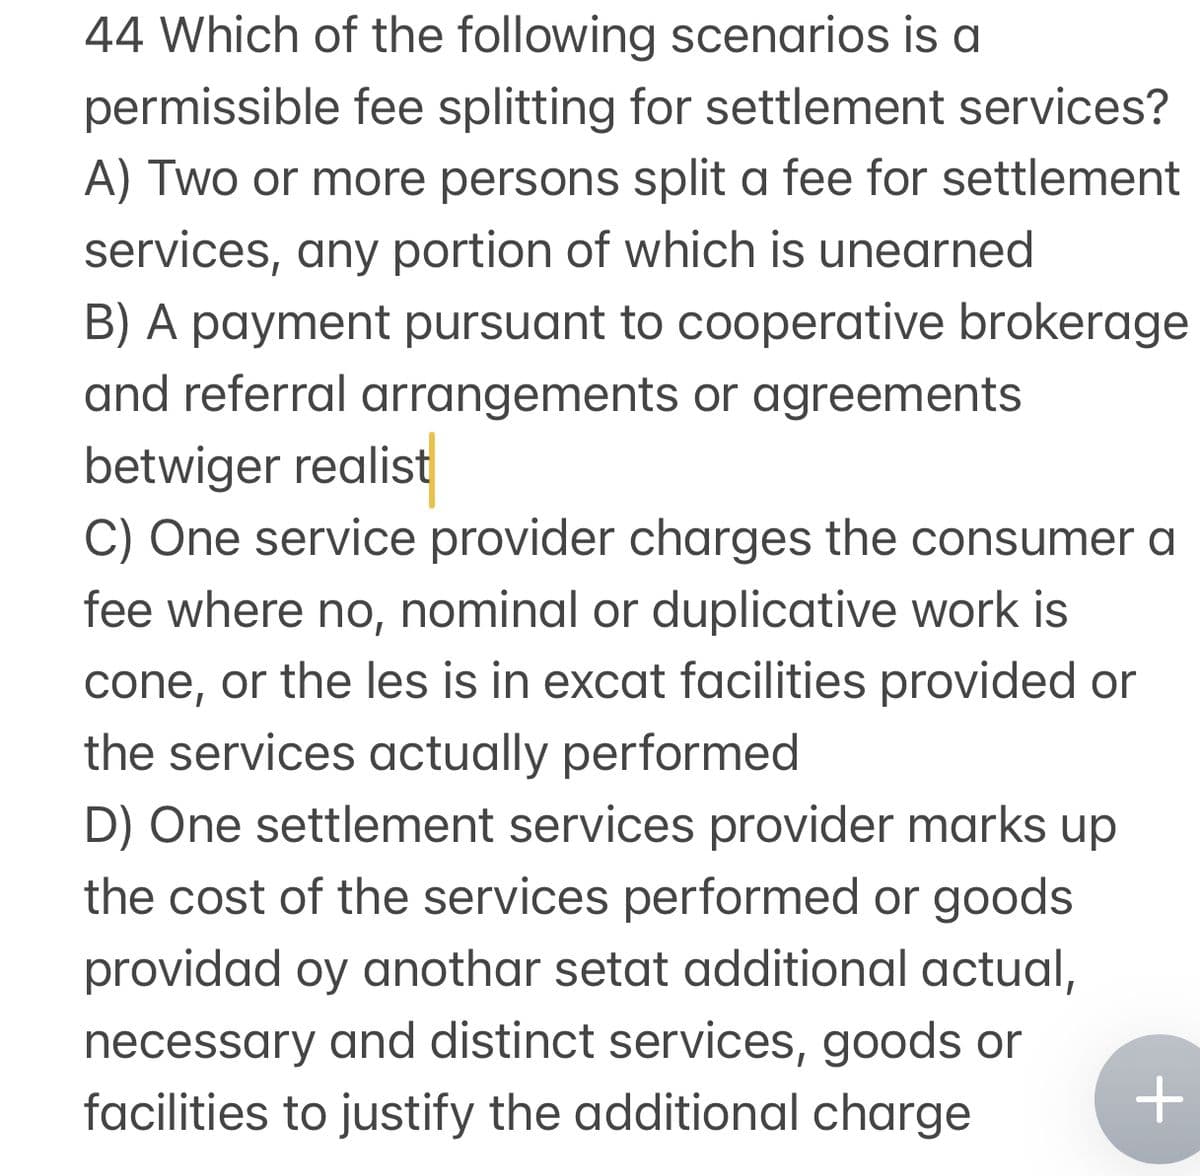 44 Which of the following scenarios is a
permissible fee splitting for settlement services?
A) Two or more persons split a fee for settlement
services, any portion of which is unearned
B) A payment pursuant to cooperative brokerage
and referral arrangements or agreements
betwiger realist
C) One service provider charges the consumer a
fee where no, nominal or duplicative work is
cone, or the les is in excat facilities provided or
the services actually performed
D) One settlement services provider marks up
the cost of the services performed or goods
providad oy anothar setat additional actual,
necessary and distinct services, goods or
facilities to justify the additional charge
+